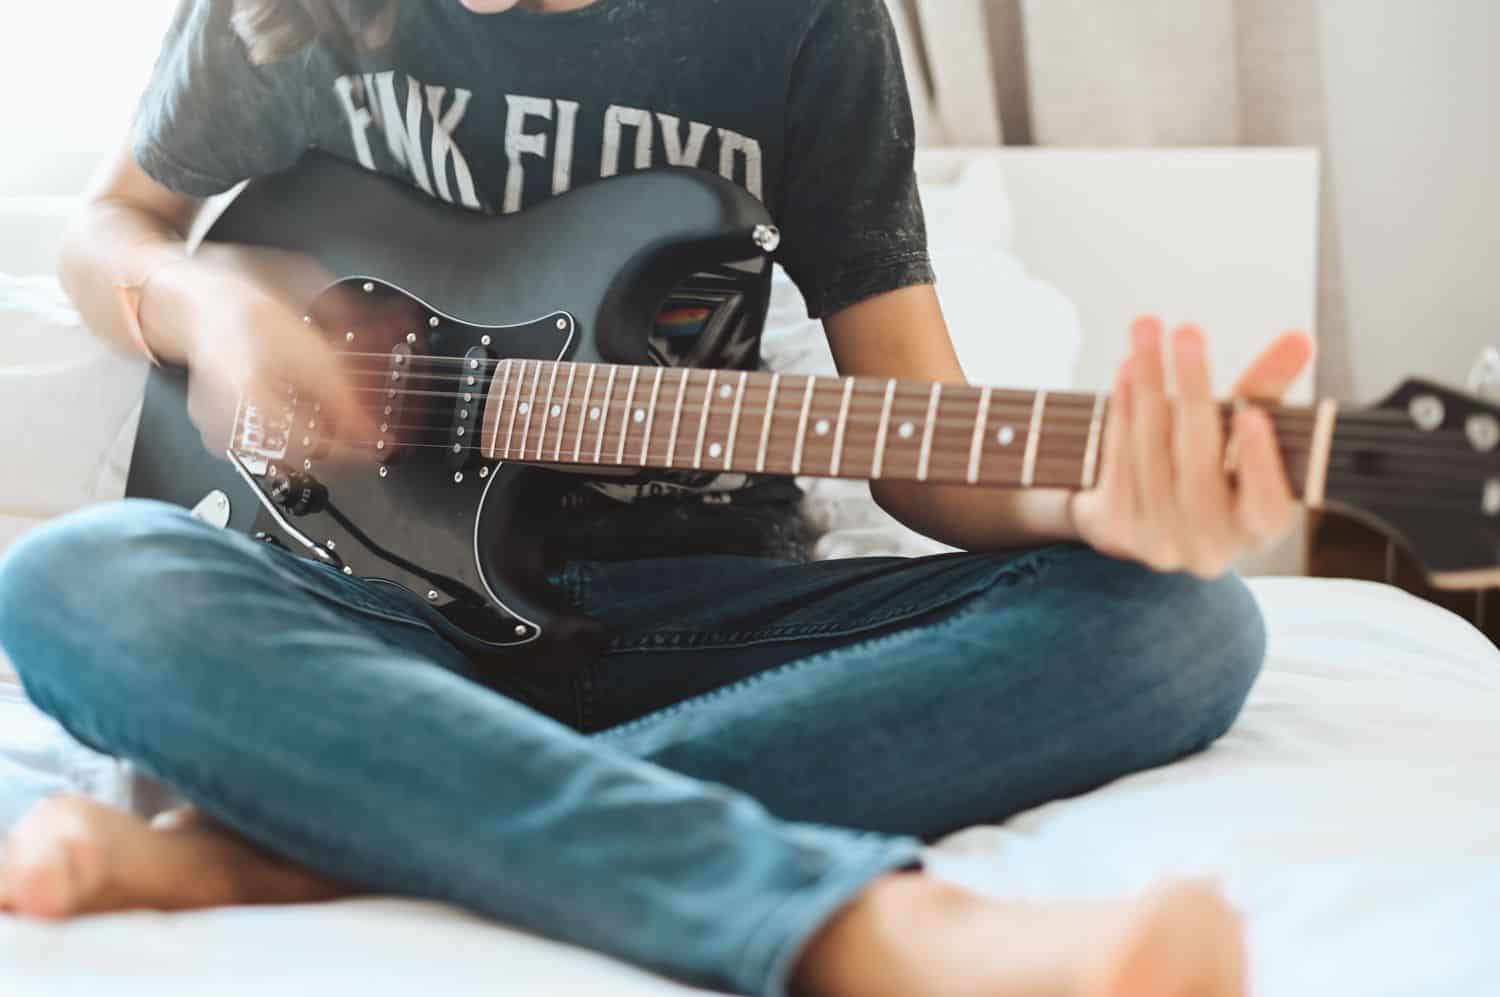 A person sits cross-legged on a white bed playing an electric guitar.